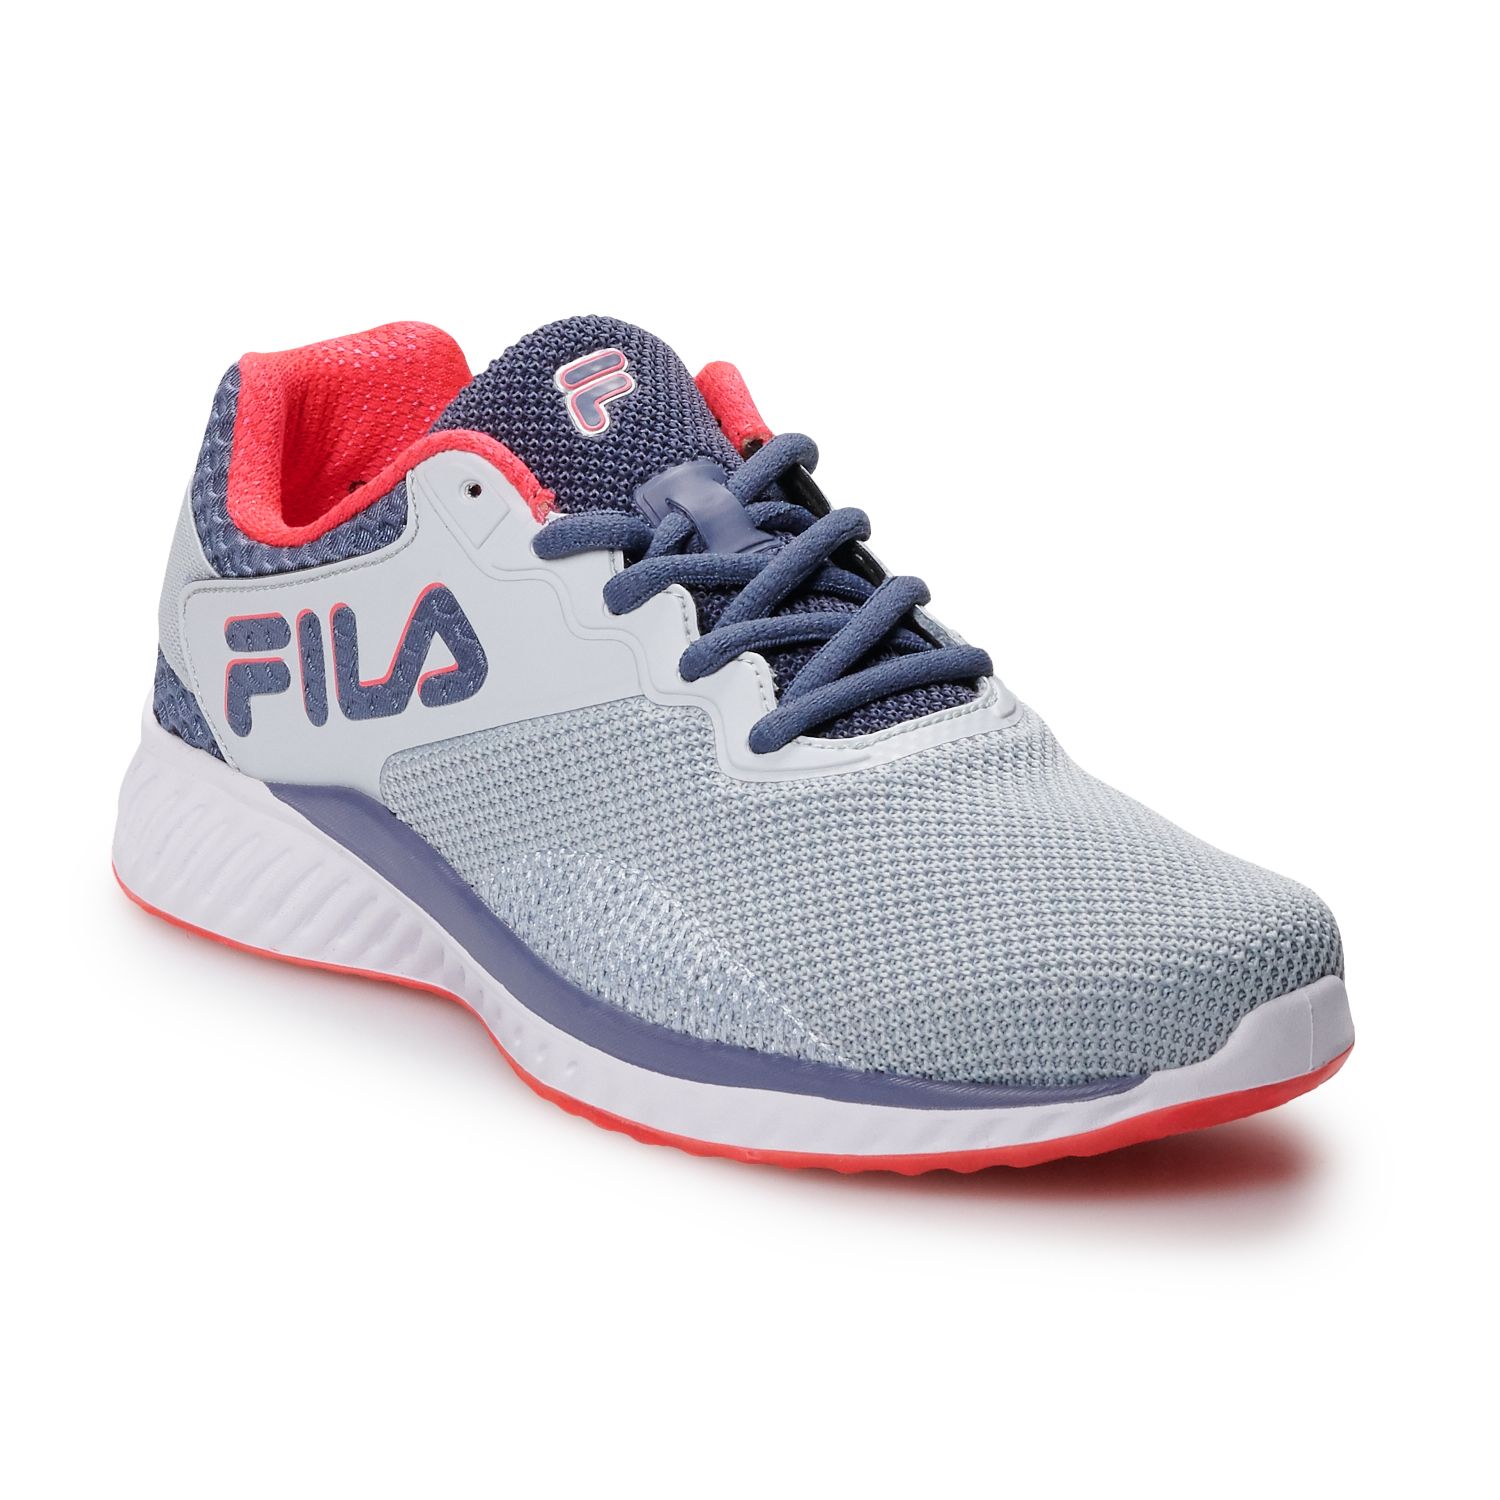 fila gray and pink sneakers